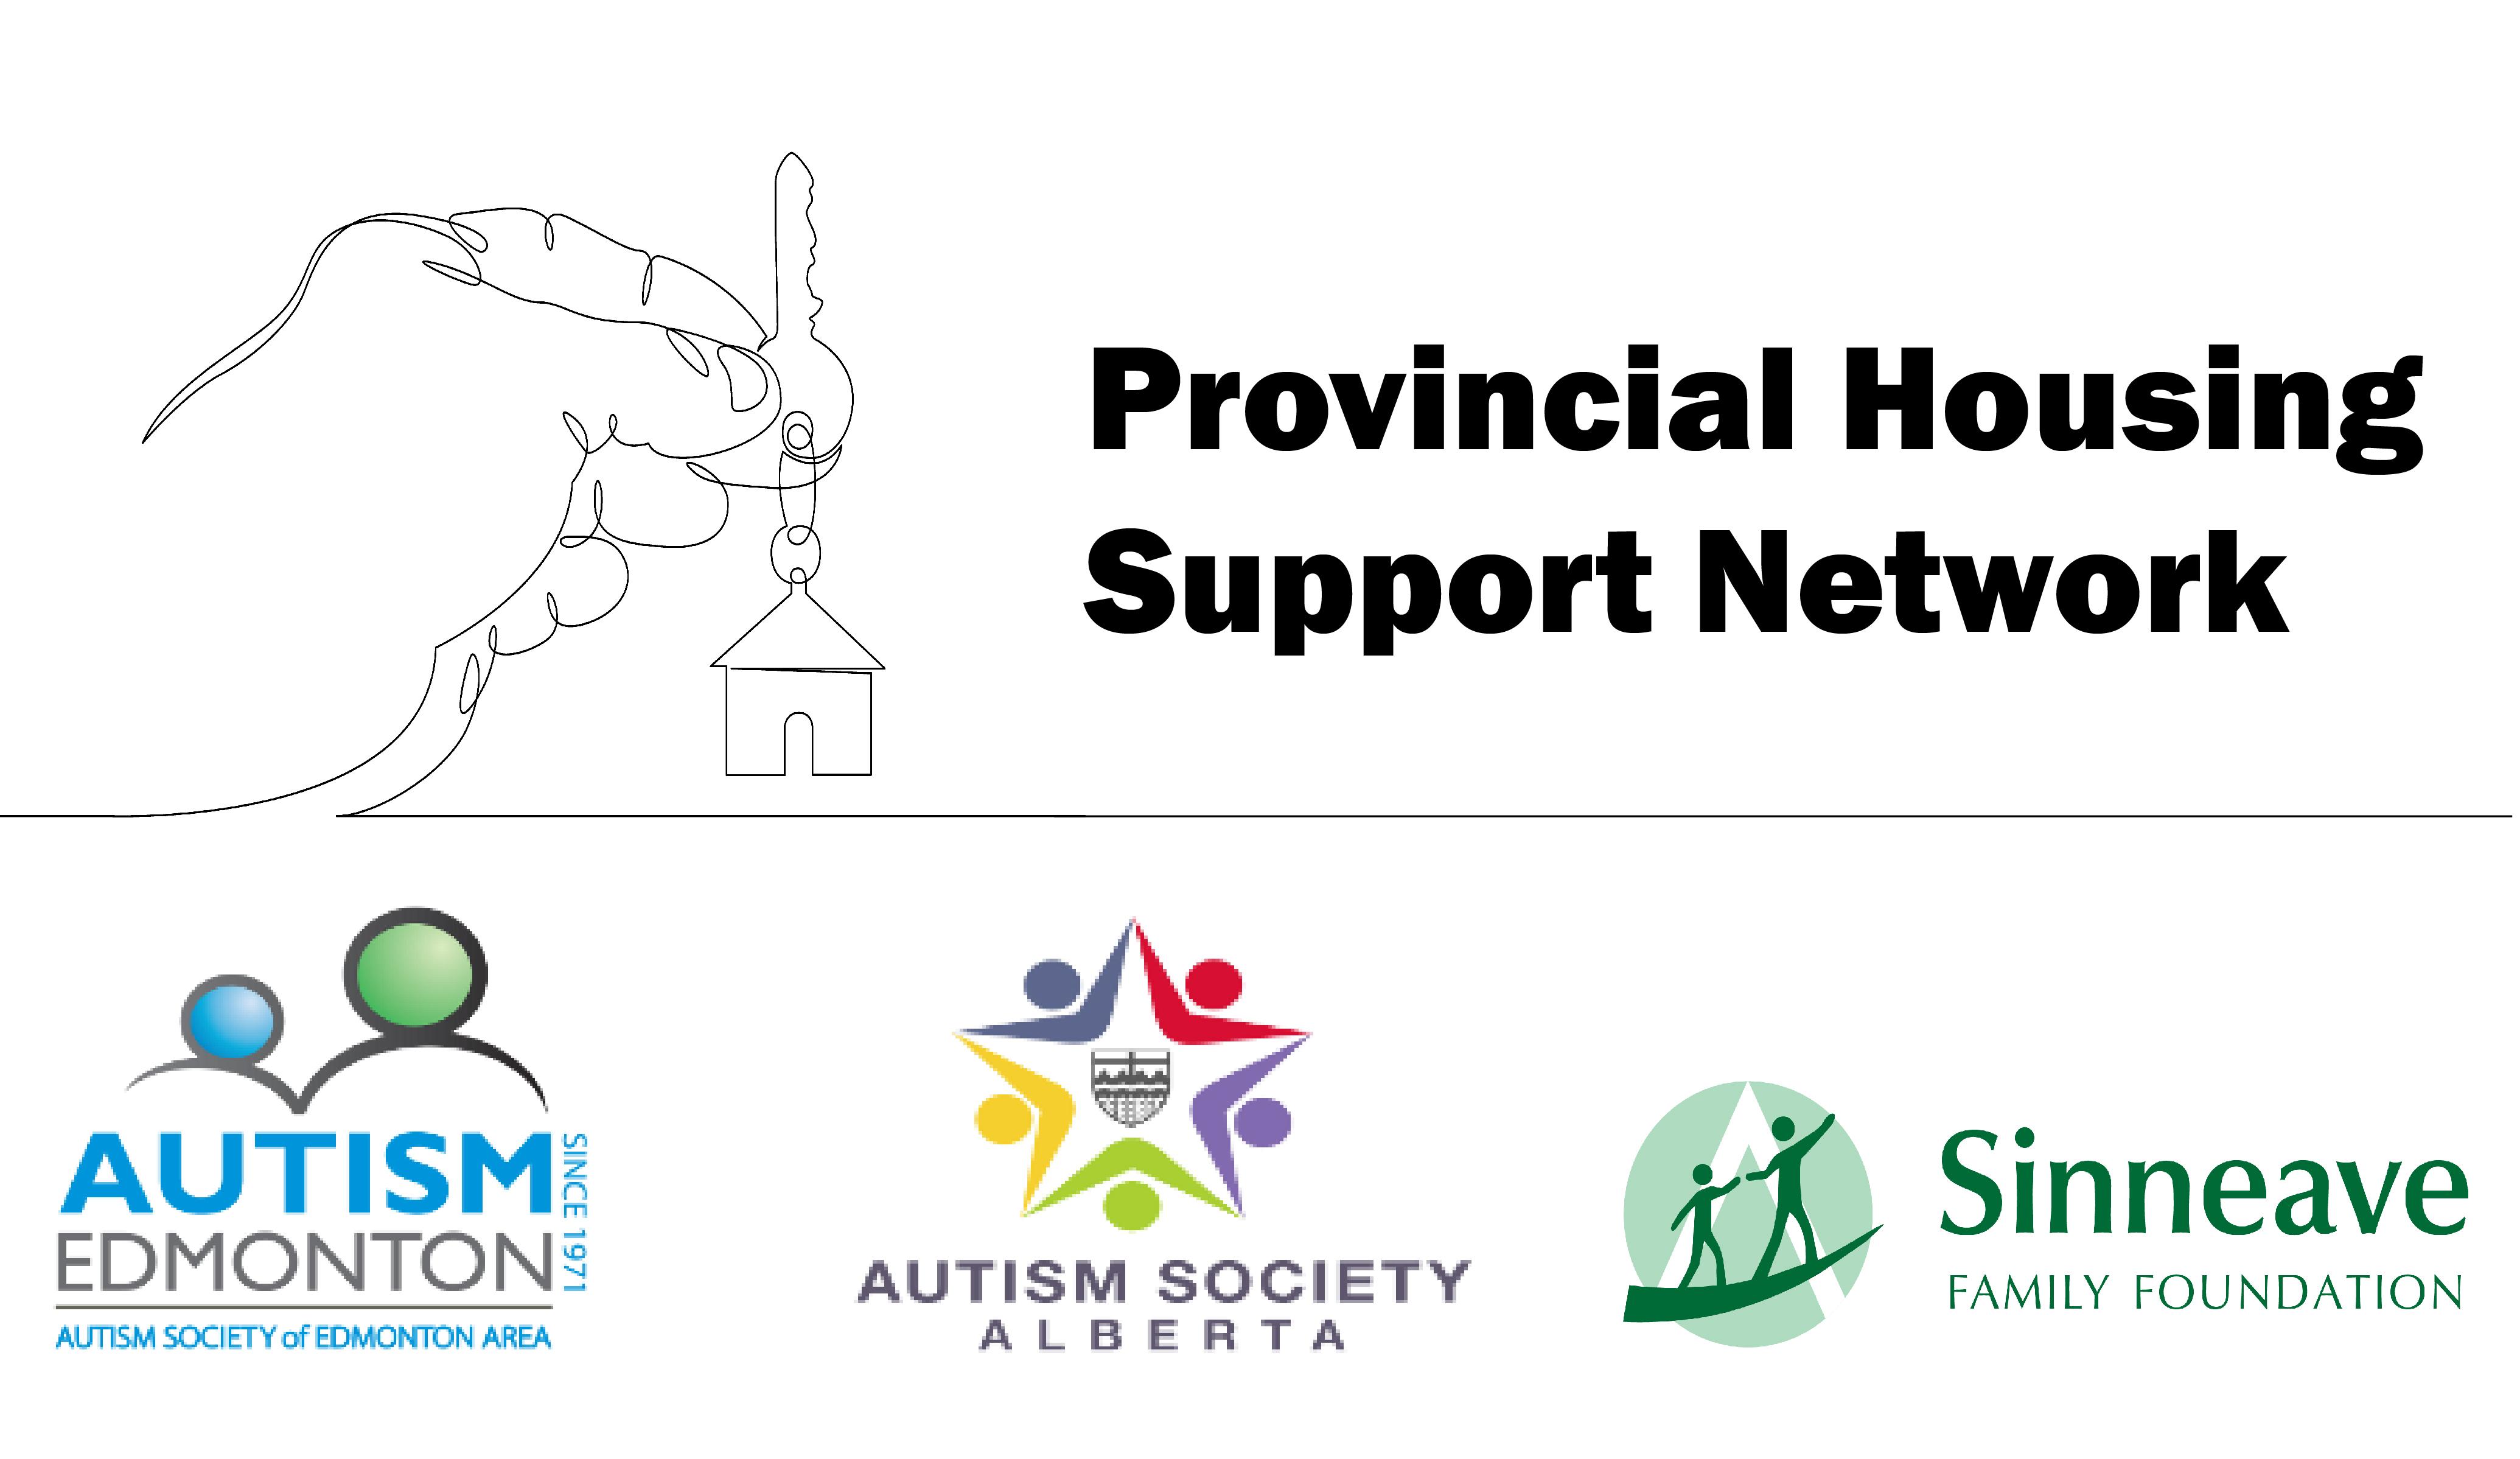 An image showing the members of the Provincial Housing Support Network. The members are the Autism Society of Alberta, Autism Edmonton, and The Sinneave Family Foundation. Their logos are also seen in the image.